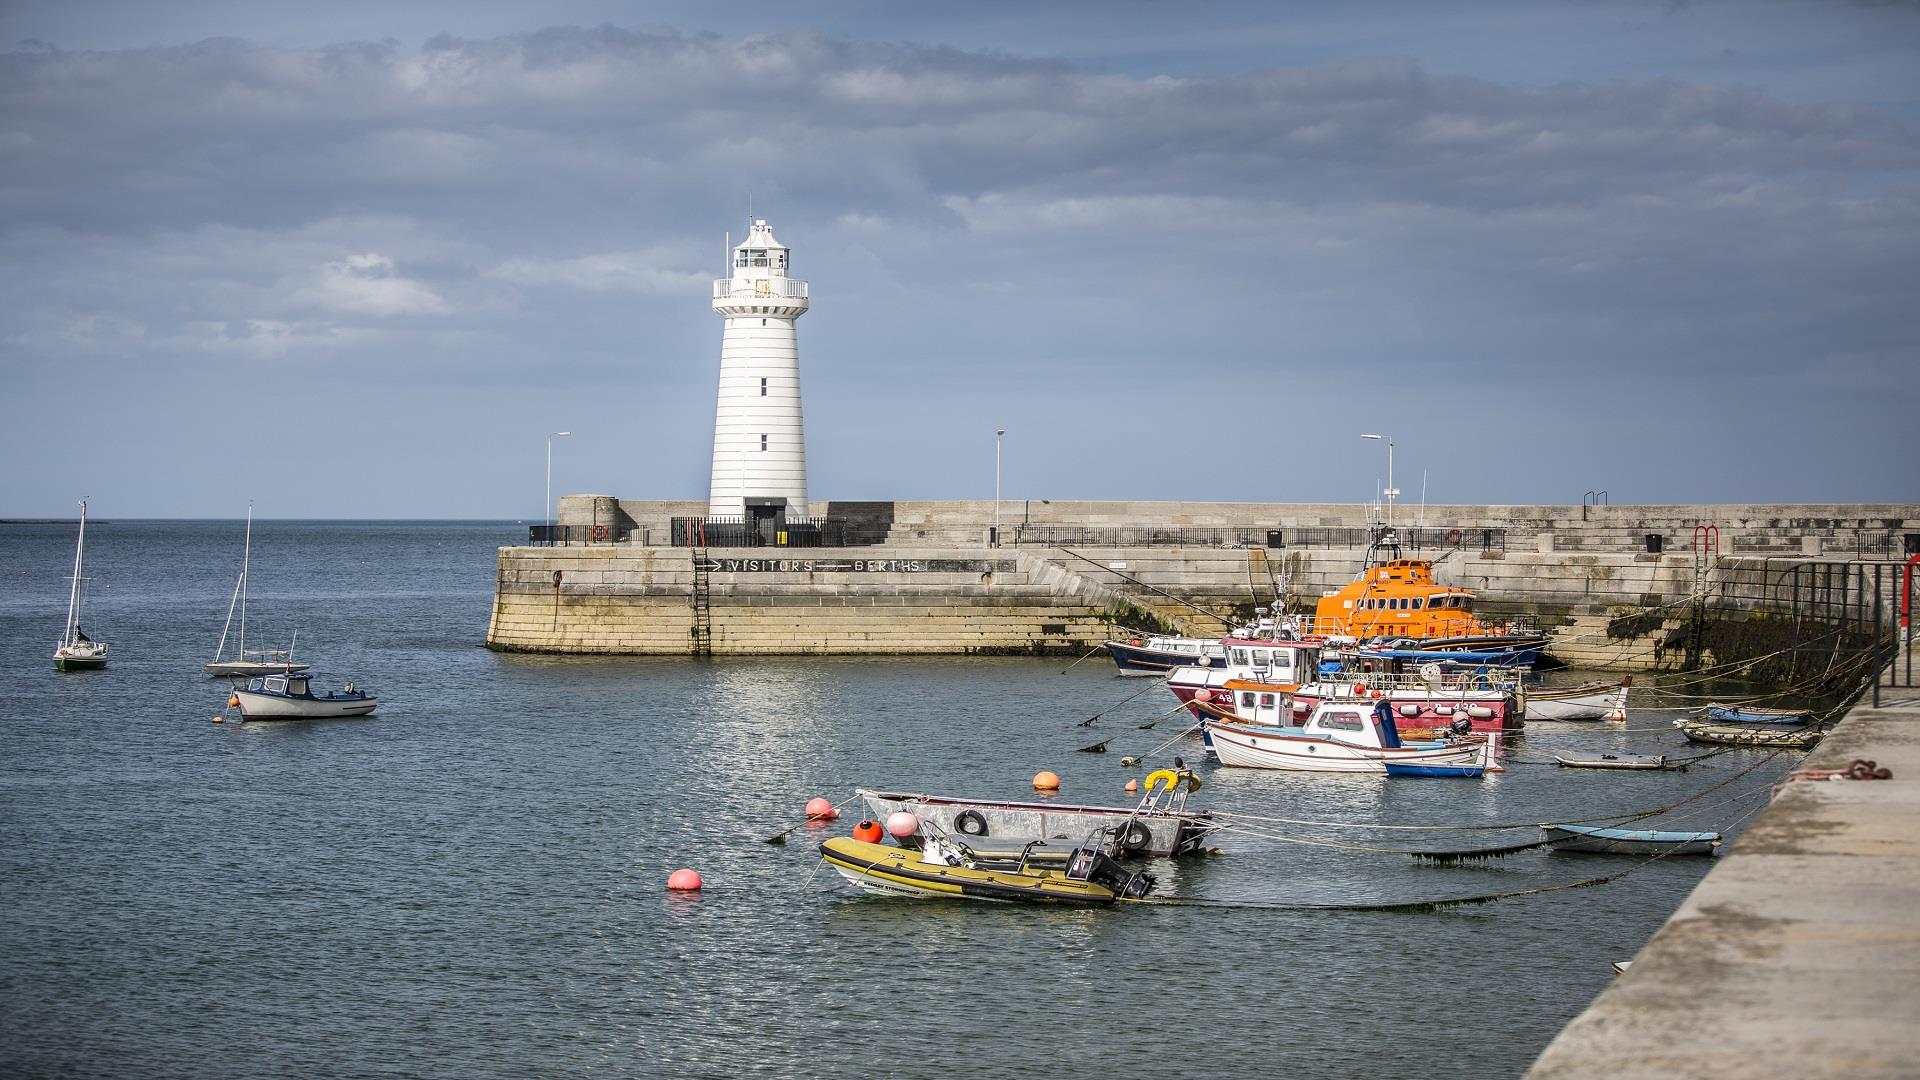 Image of Donaghadee lighthouse and boats tied in the harbour